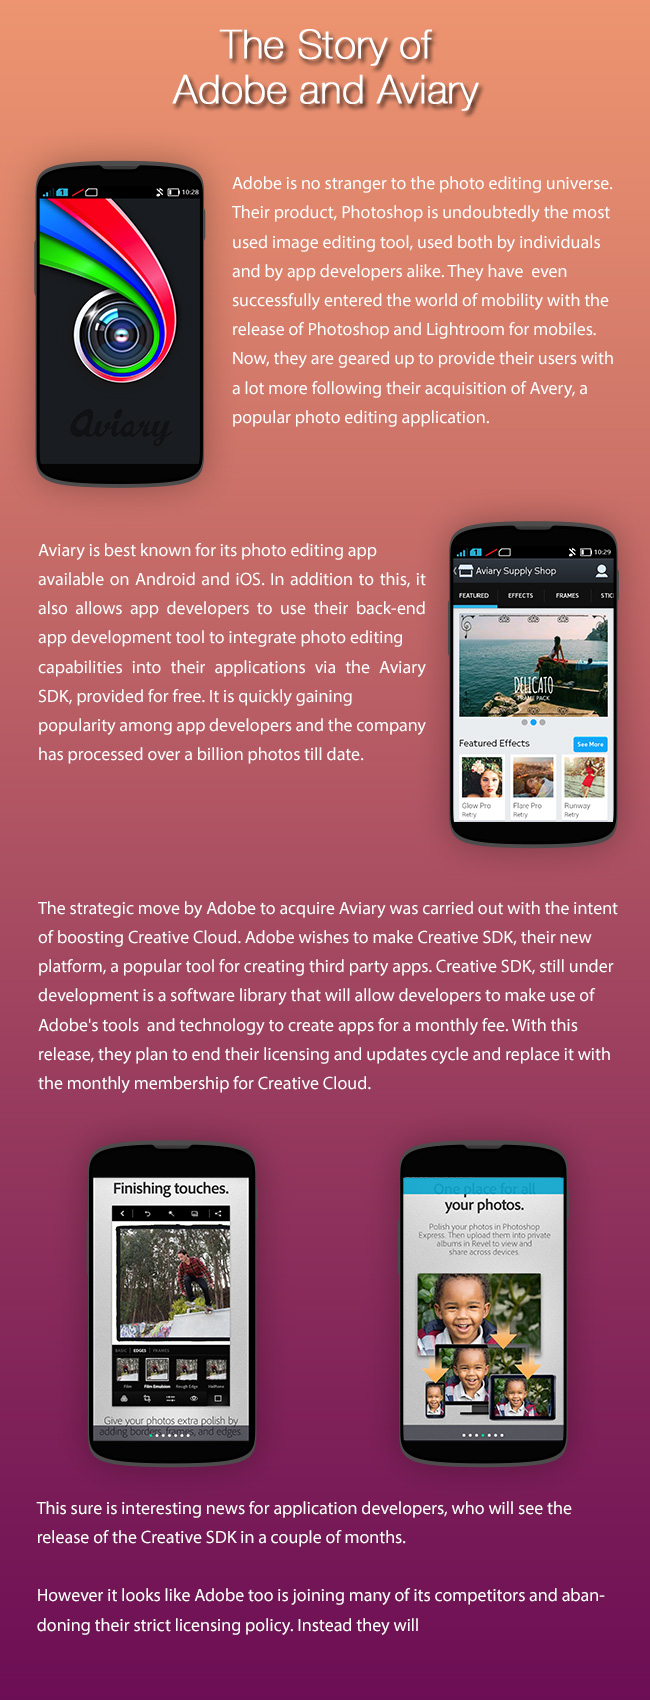 The Story of Adobe and Aviary